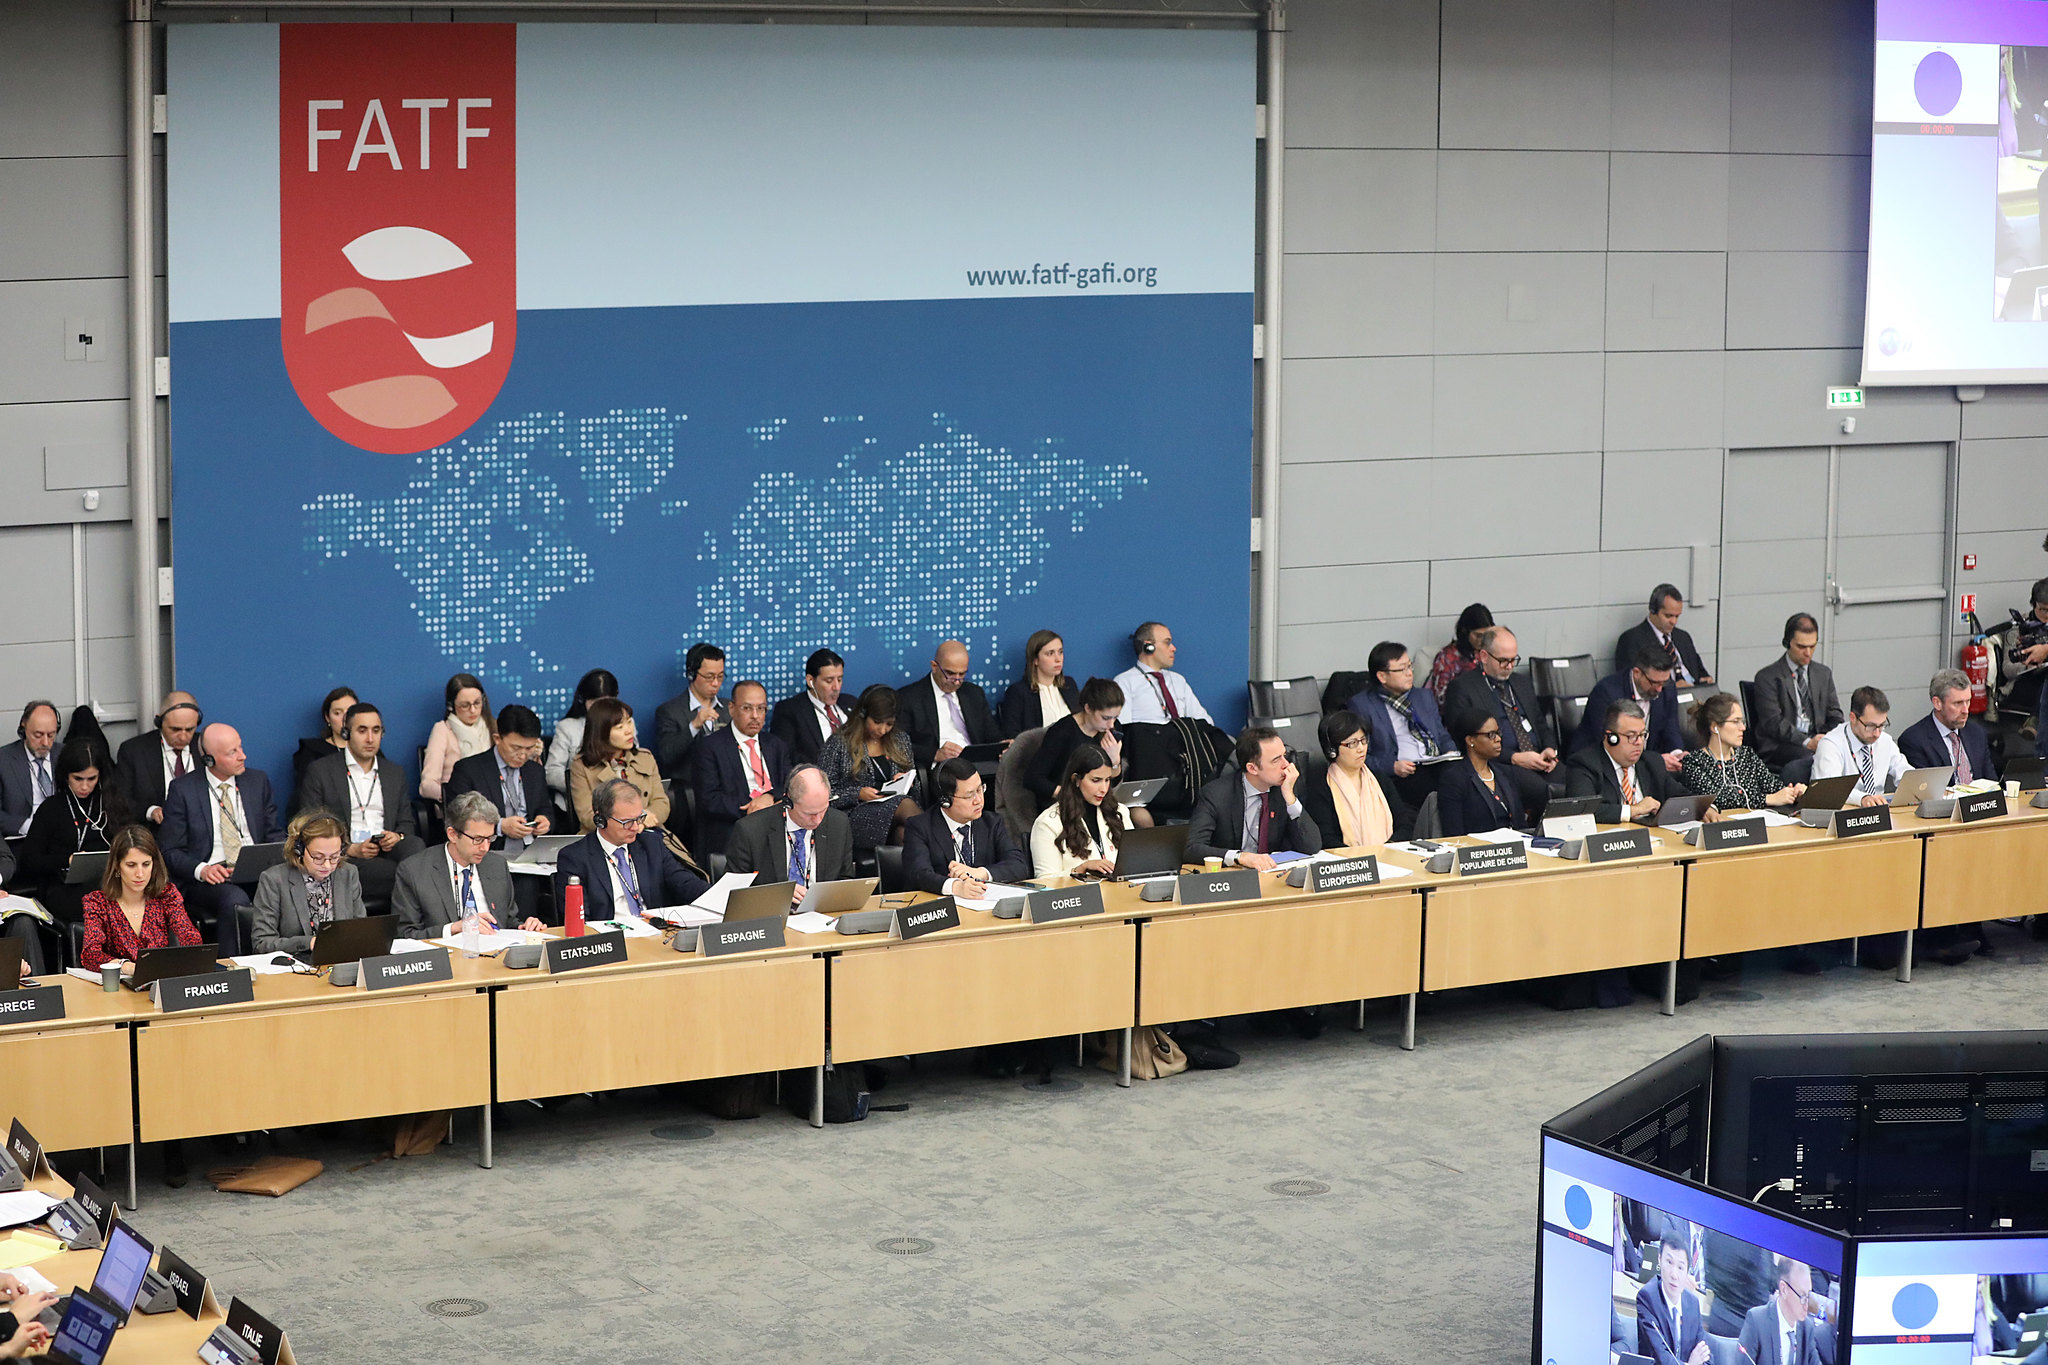 Germany-seeks-to-expand-digital-efforts-at-fatf-as-it-takes-on-watchdog’s-presidency